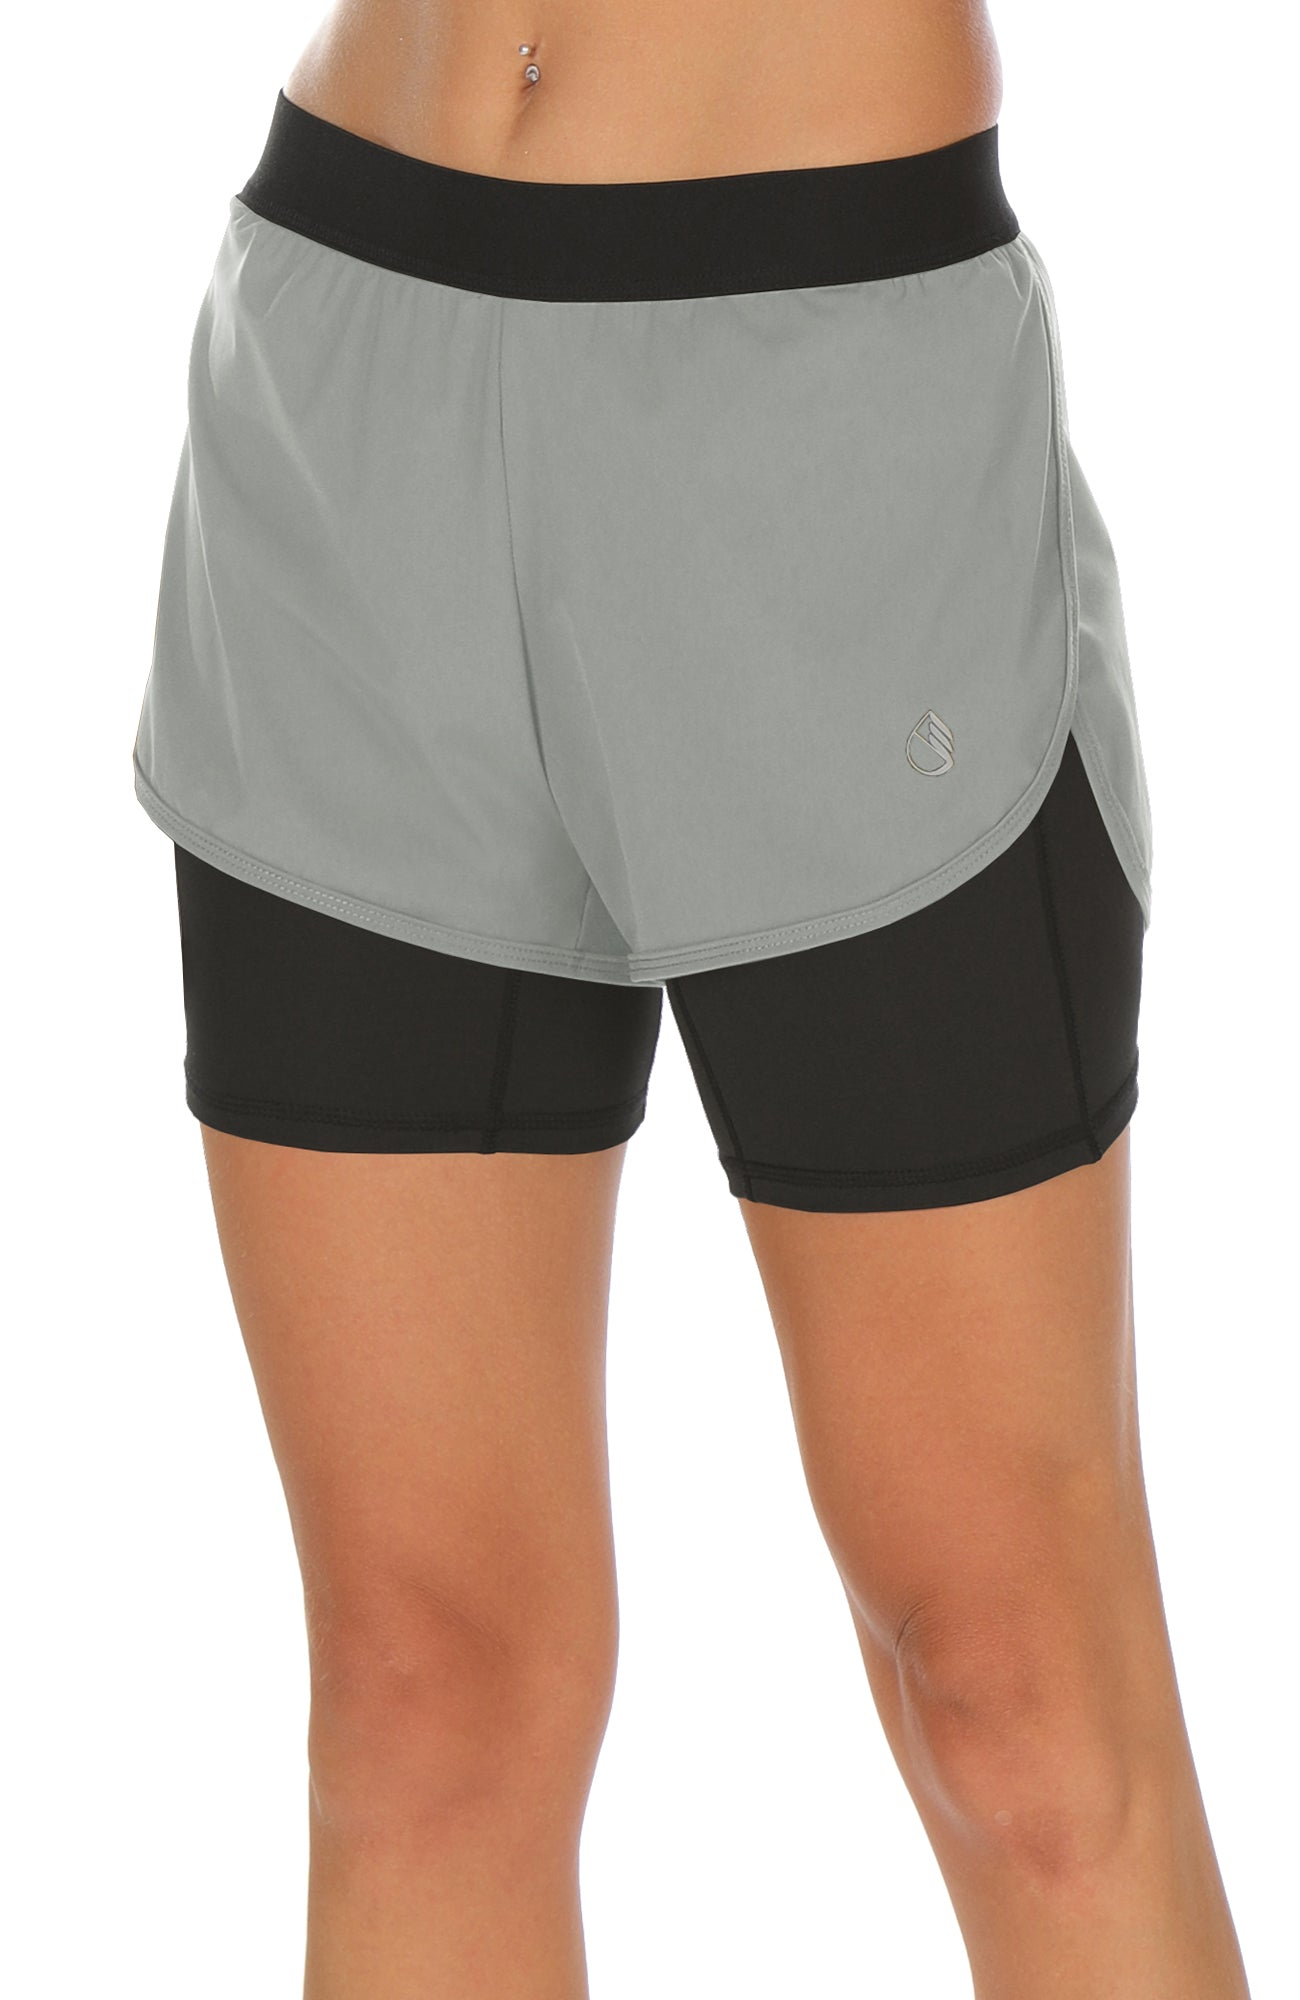 Womens Running Shorts 2 in 1 Athletic Shorts with Pockets